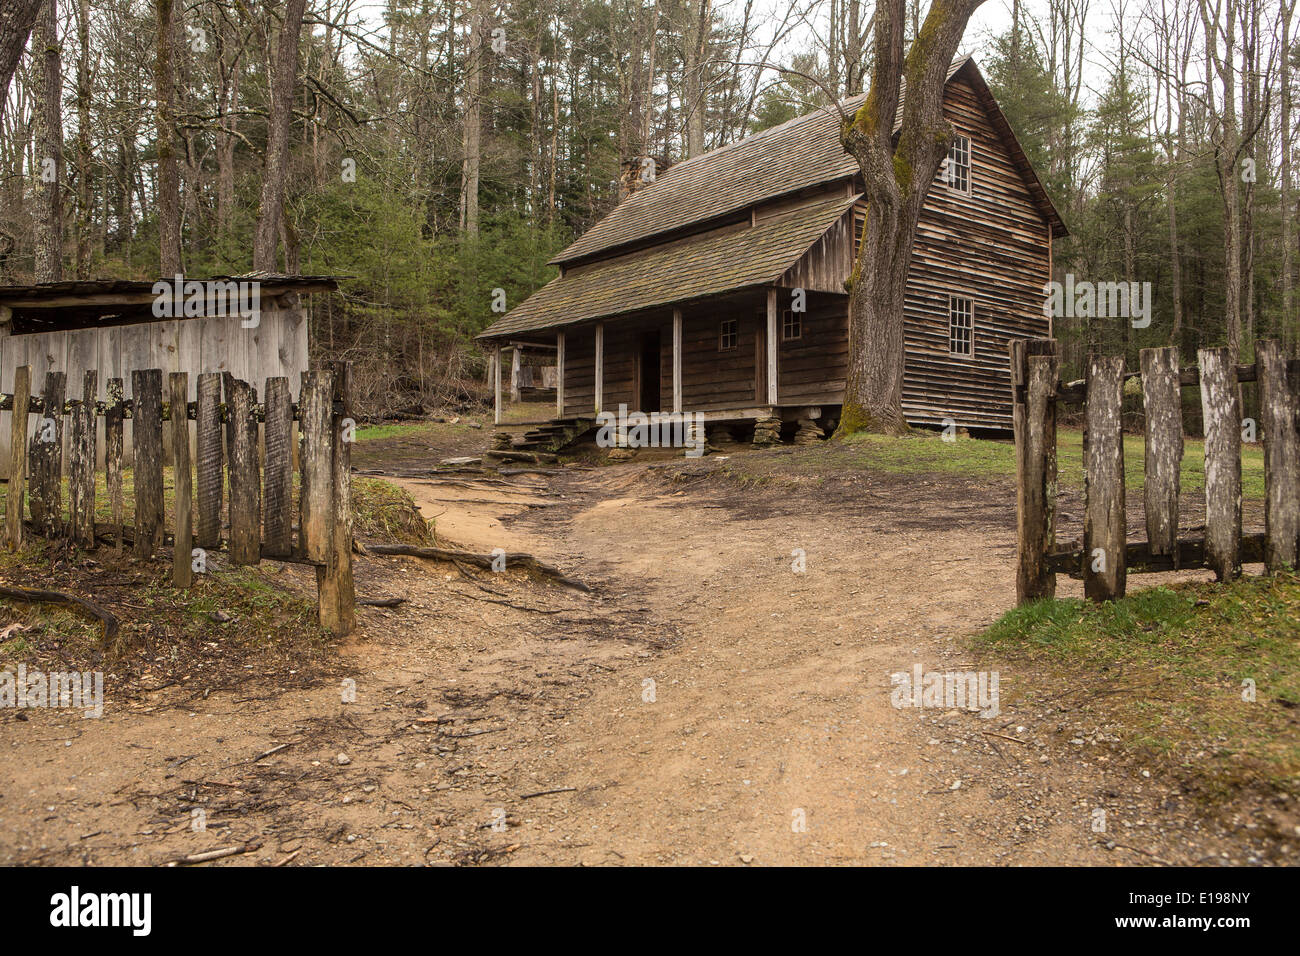 Tipton Ort ist in Cades Cove Gebiet des Great Smoky Mountains National Park in Tennessee abgebildet. Stockfoto